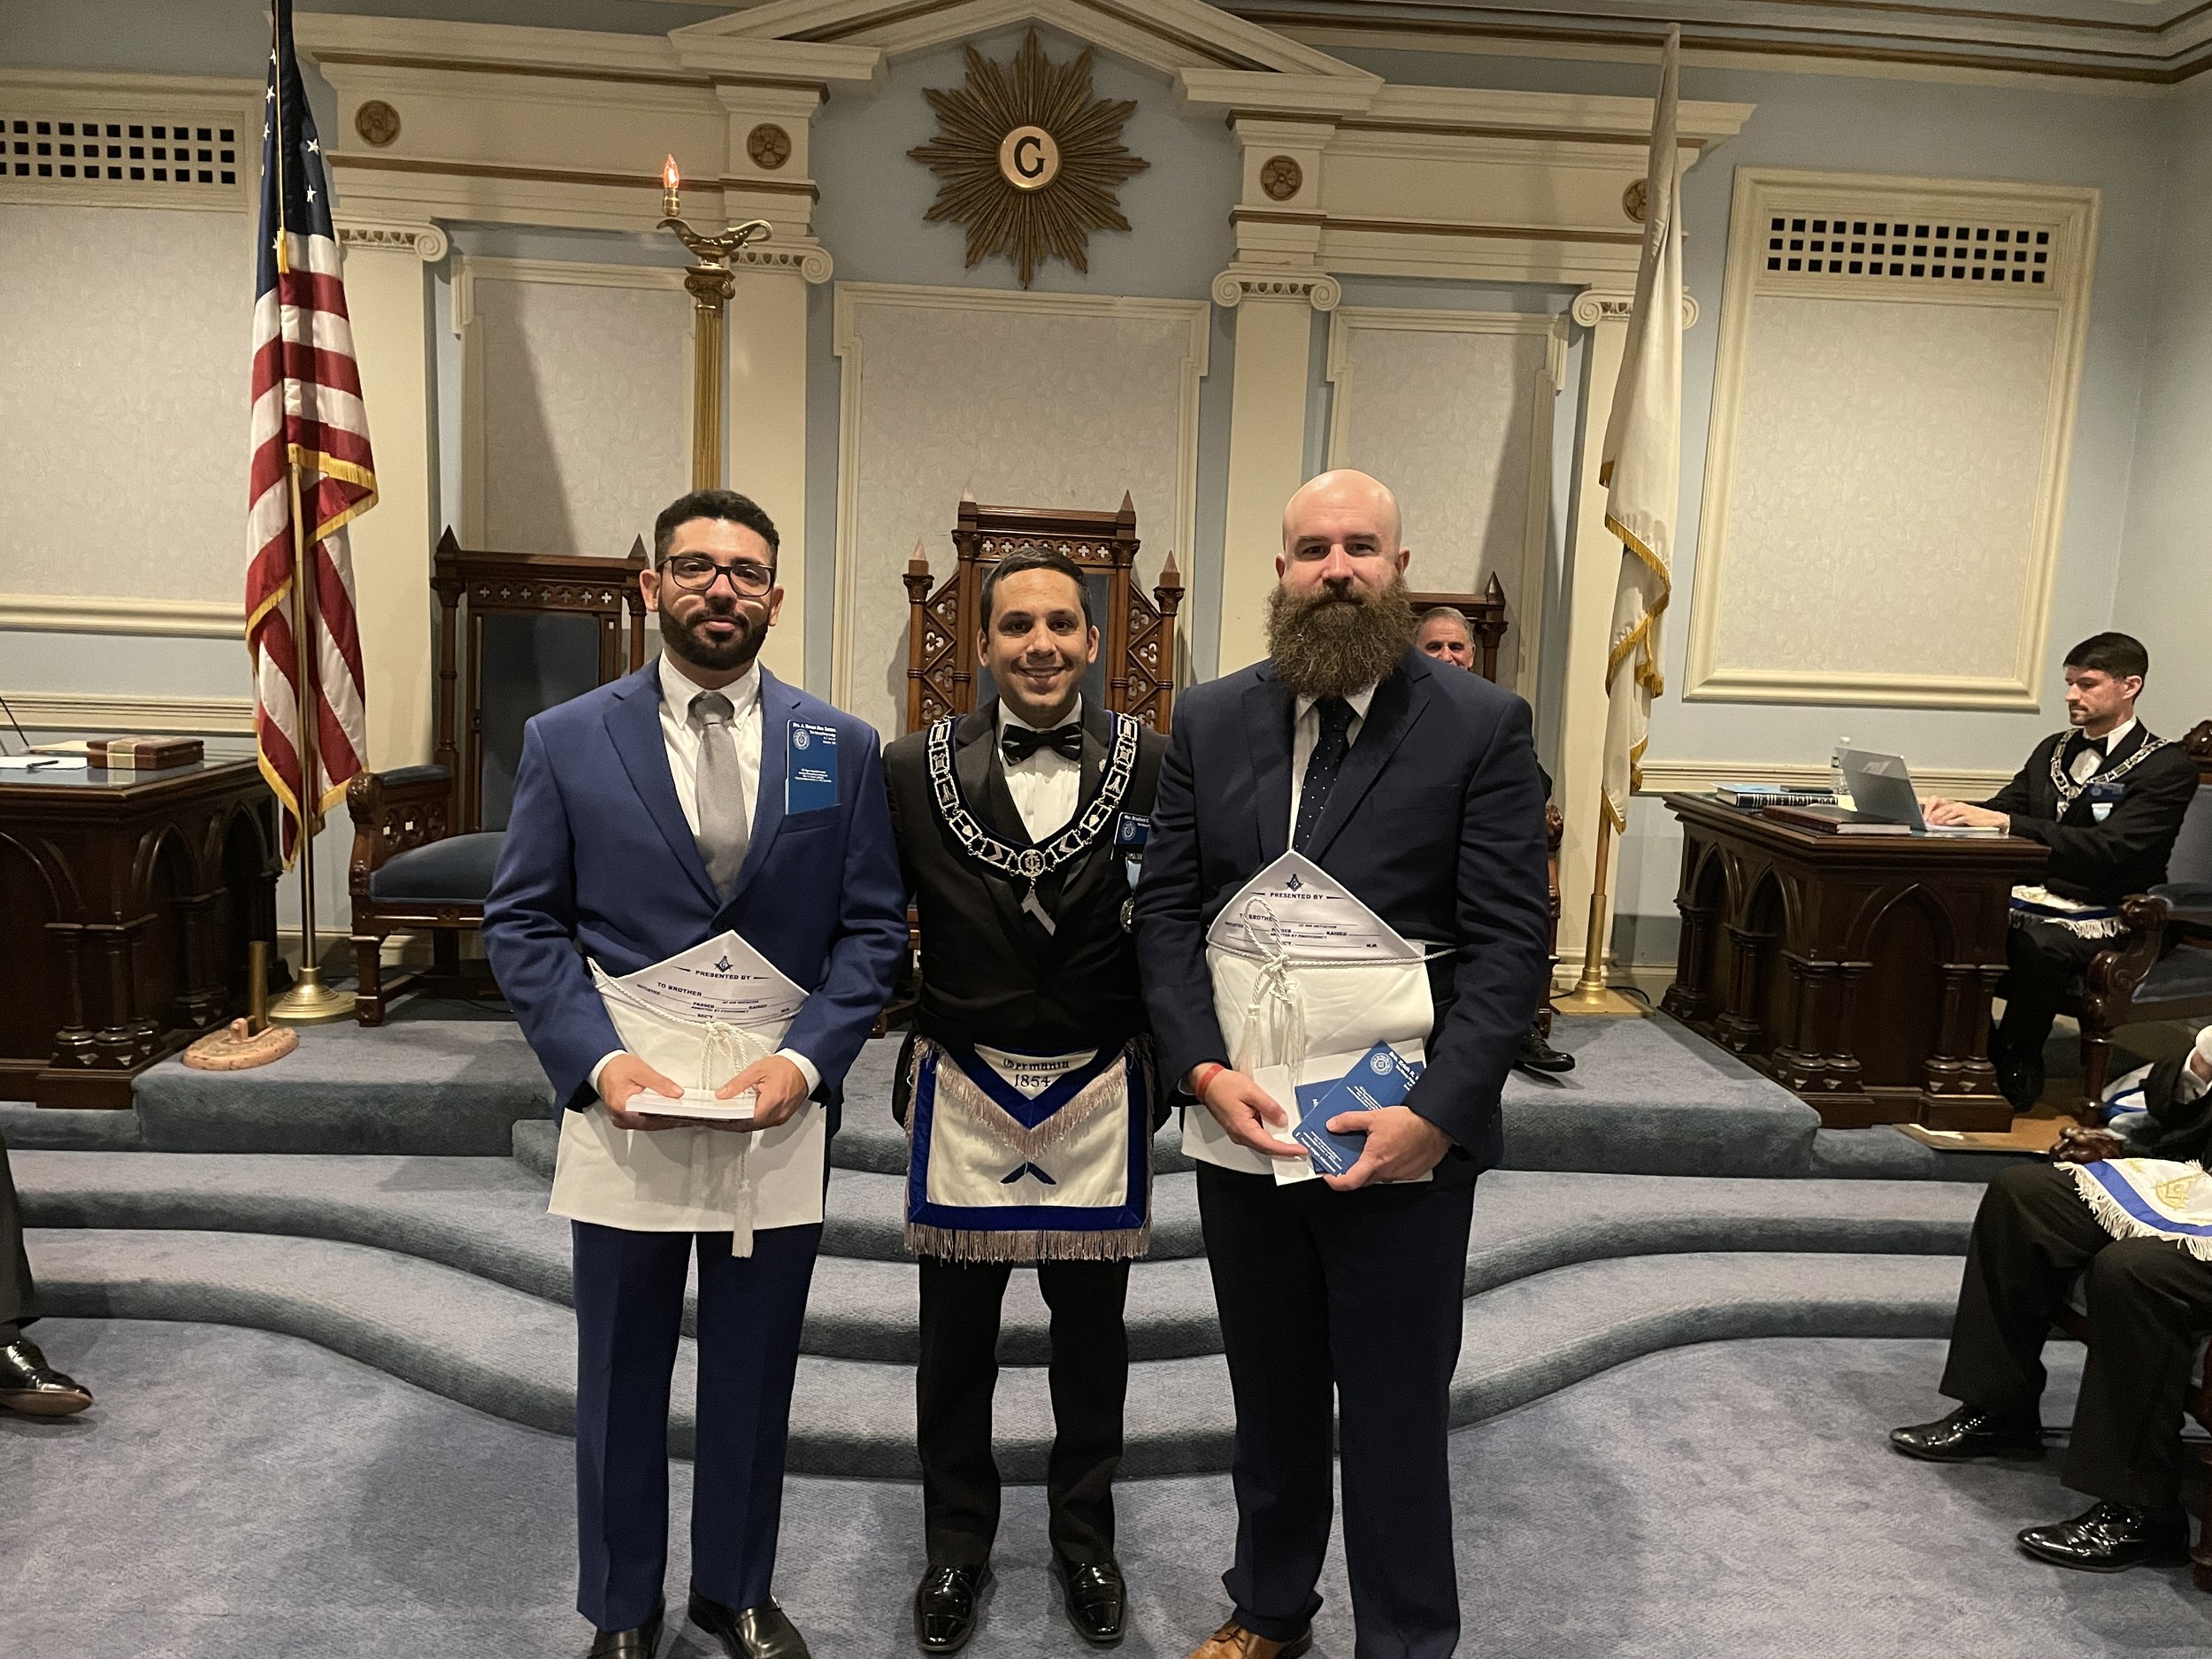  Worshipful Master, Wor. Brad Turnier welcomes the newest Entered Apprentices to The Henry Price Lodge, Bro. Erich White and Bro. A. Renan Dos Santos 